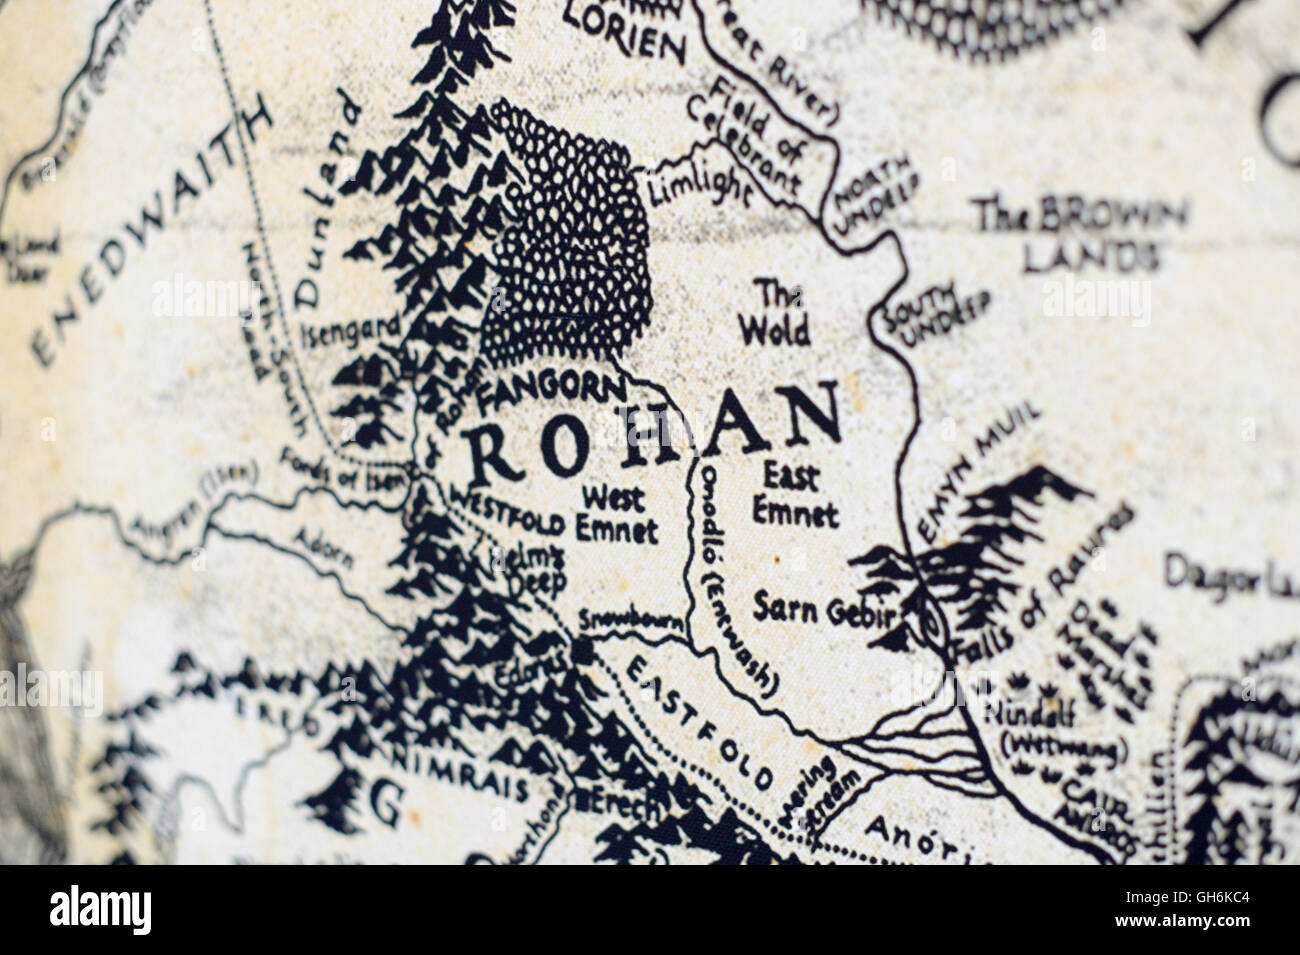 Map of Rohan from the Lord of the Rings by JRR Tolkien Stock Photo